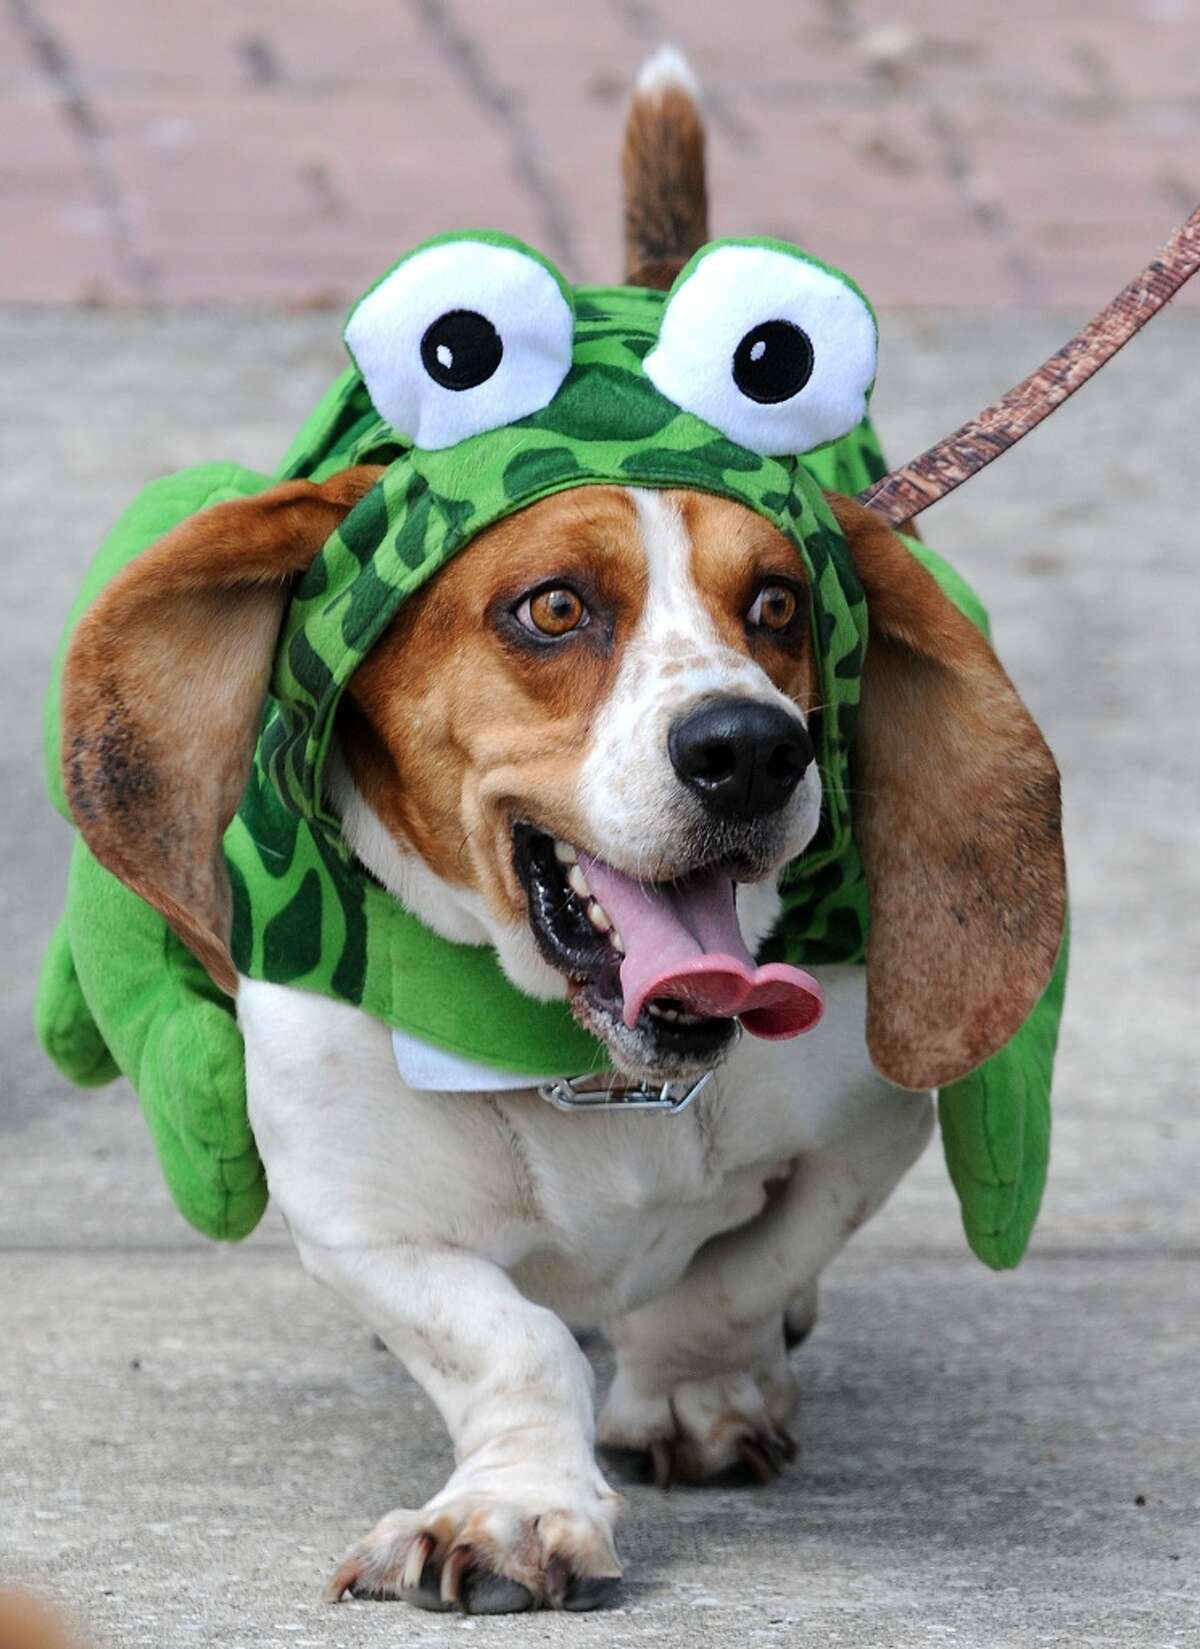 Slugo, owned by Dalton Nelson, walks in the fundraising walk wearing a frog costume, Saturday, Oct. 13, 2012 in Jacksonville, Fla.. Dogtoberfest is a fund raiser for First Coast No More Homeless Pets. (AP Photo/Florida Times-Union, Bruce Lipsky)